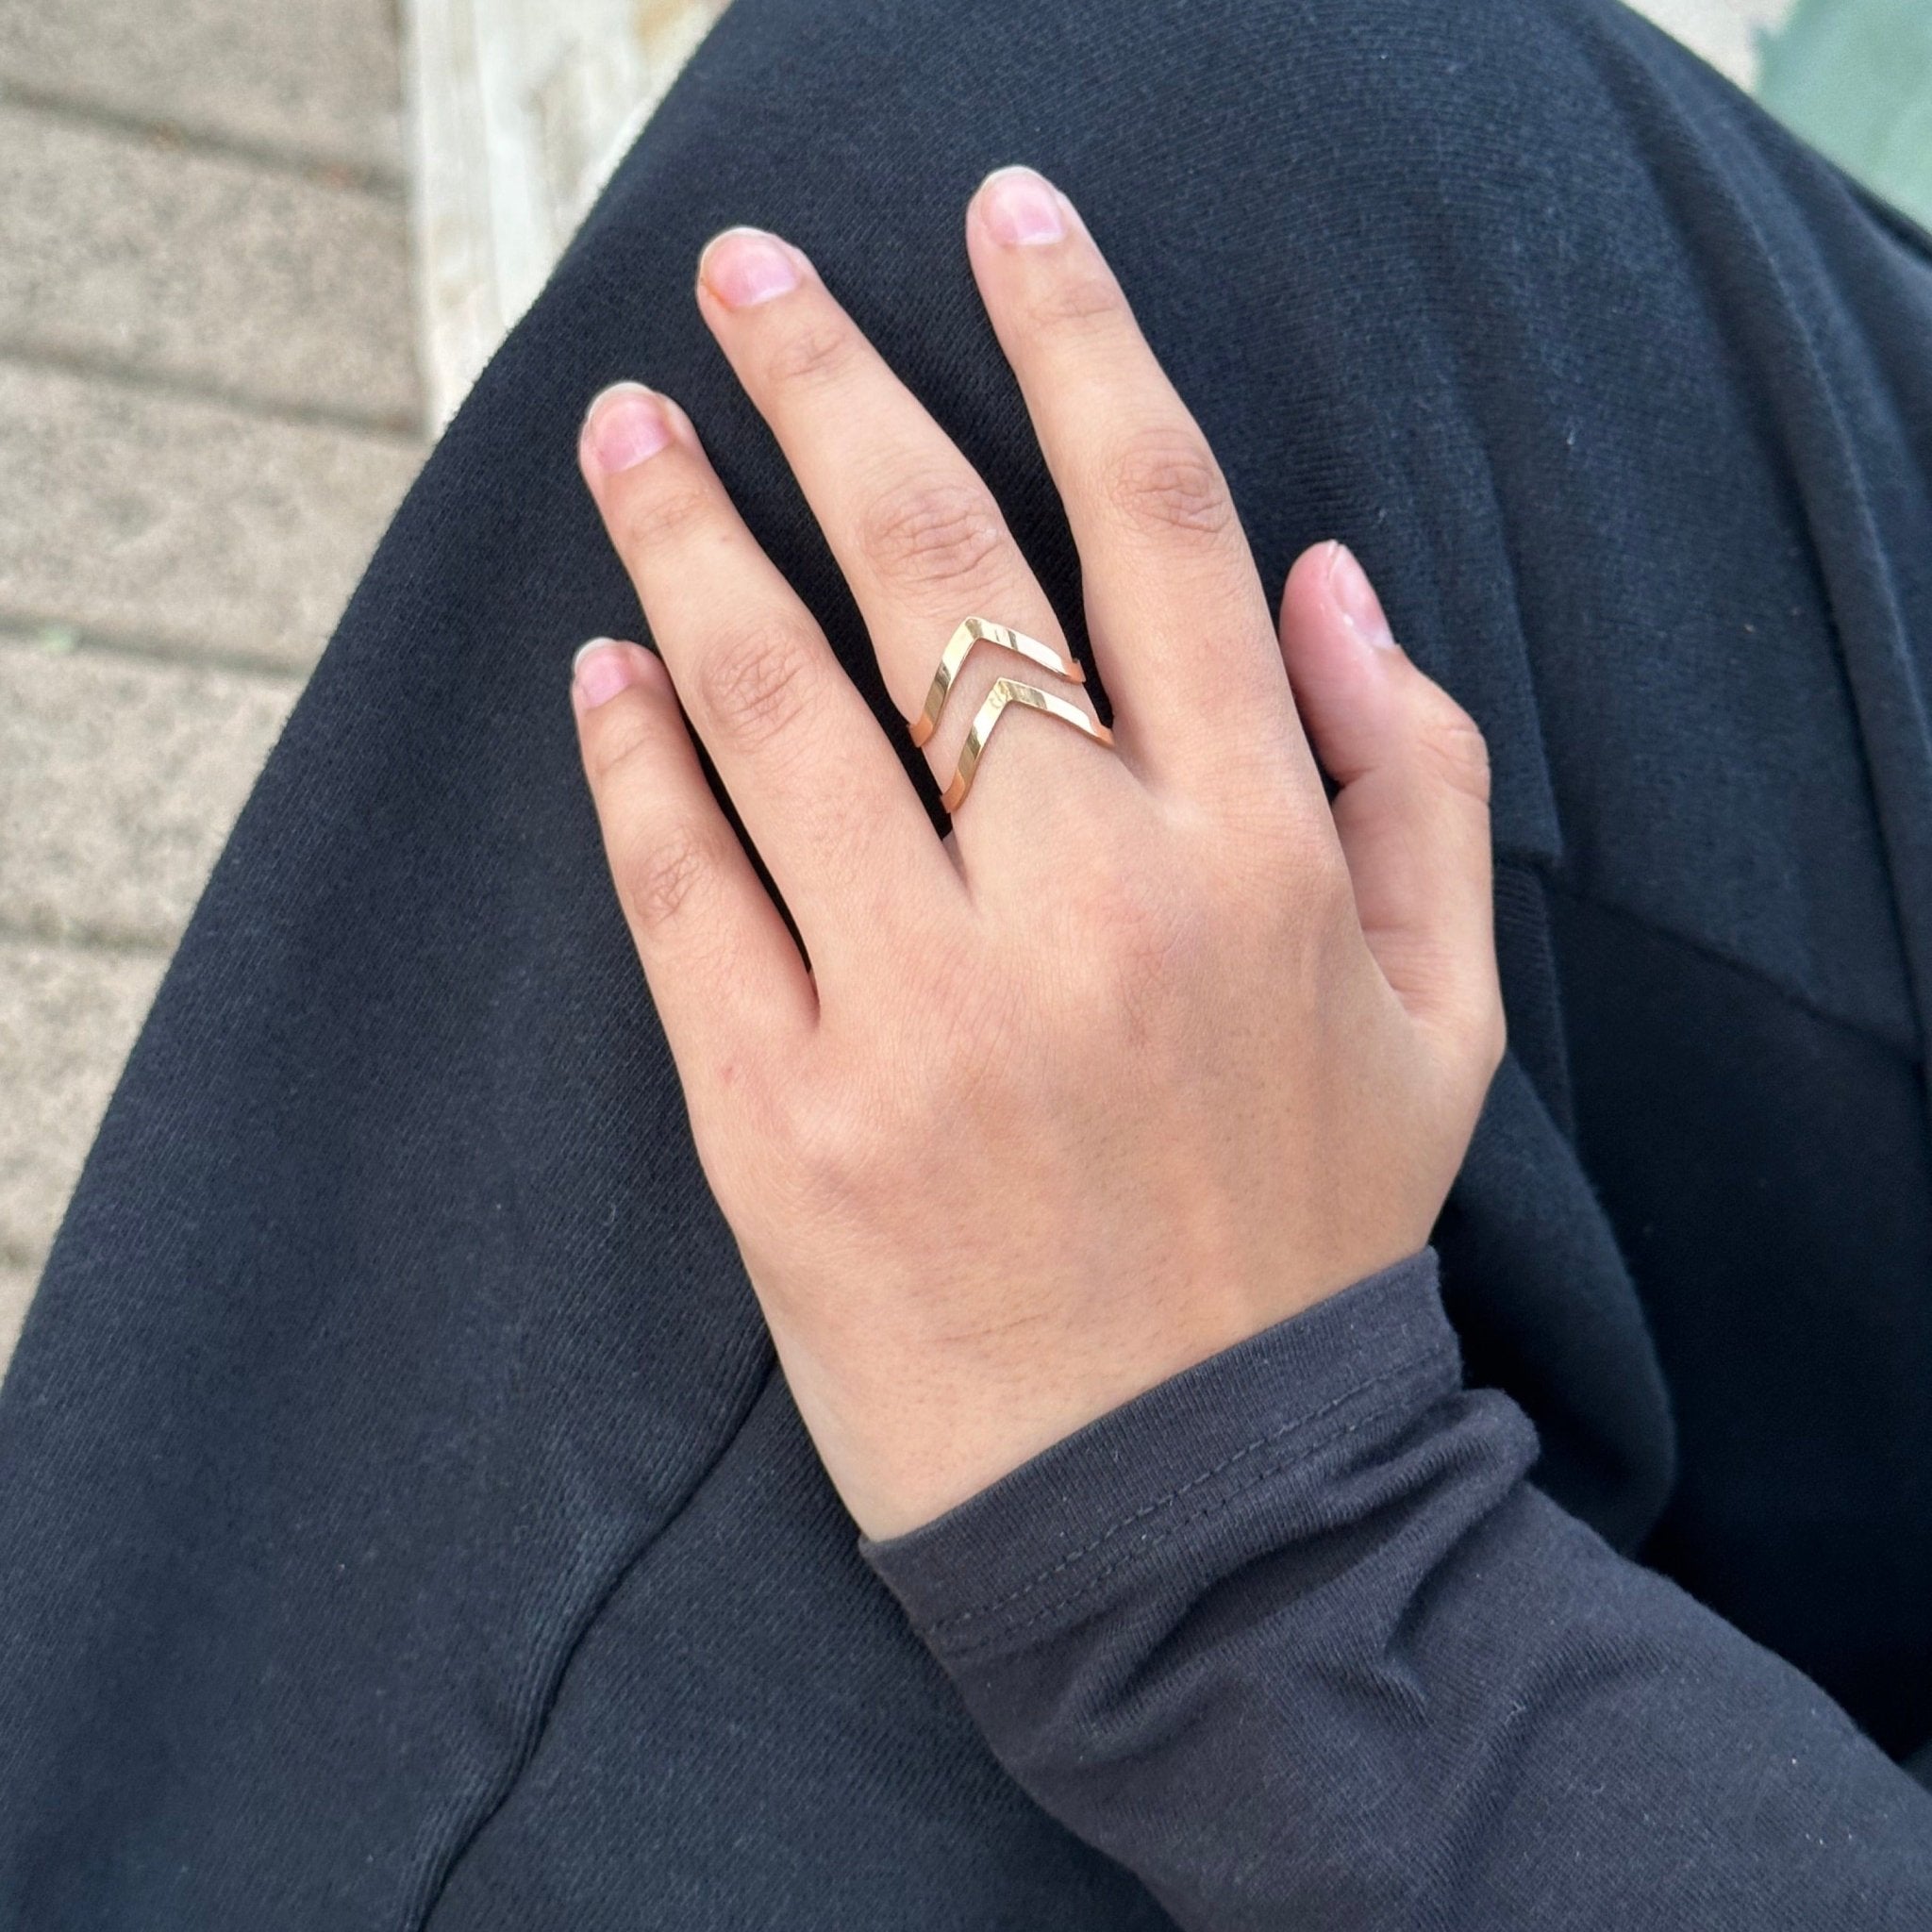 Buy Barb Rings| Made with BIS Hallmarked Gold | Starkle